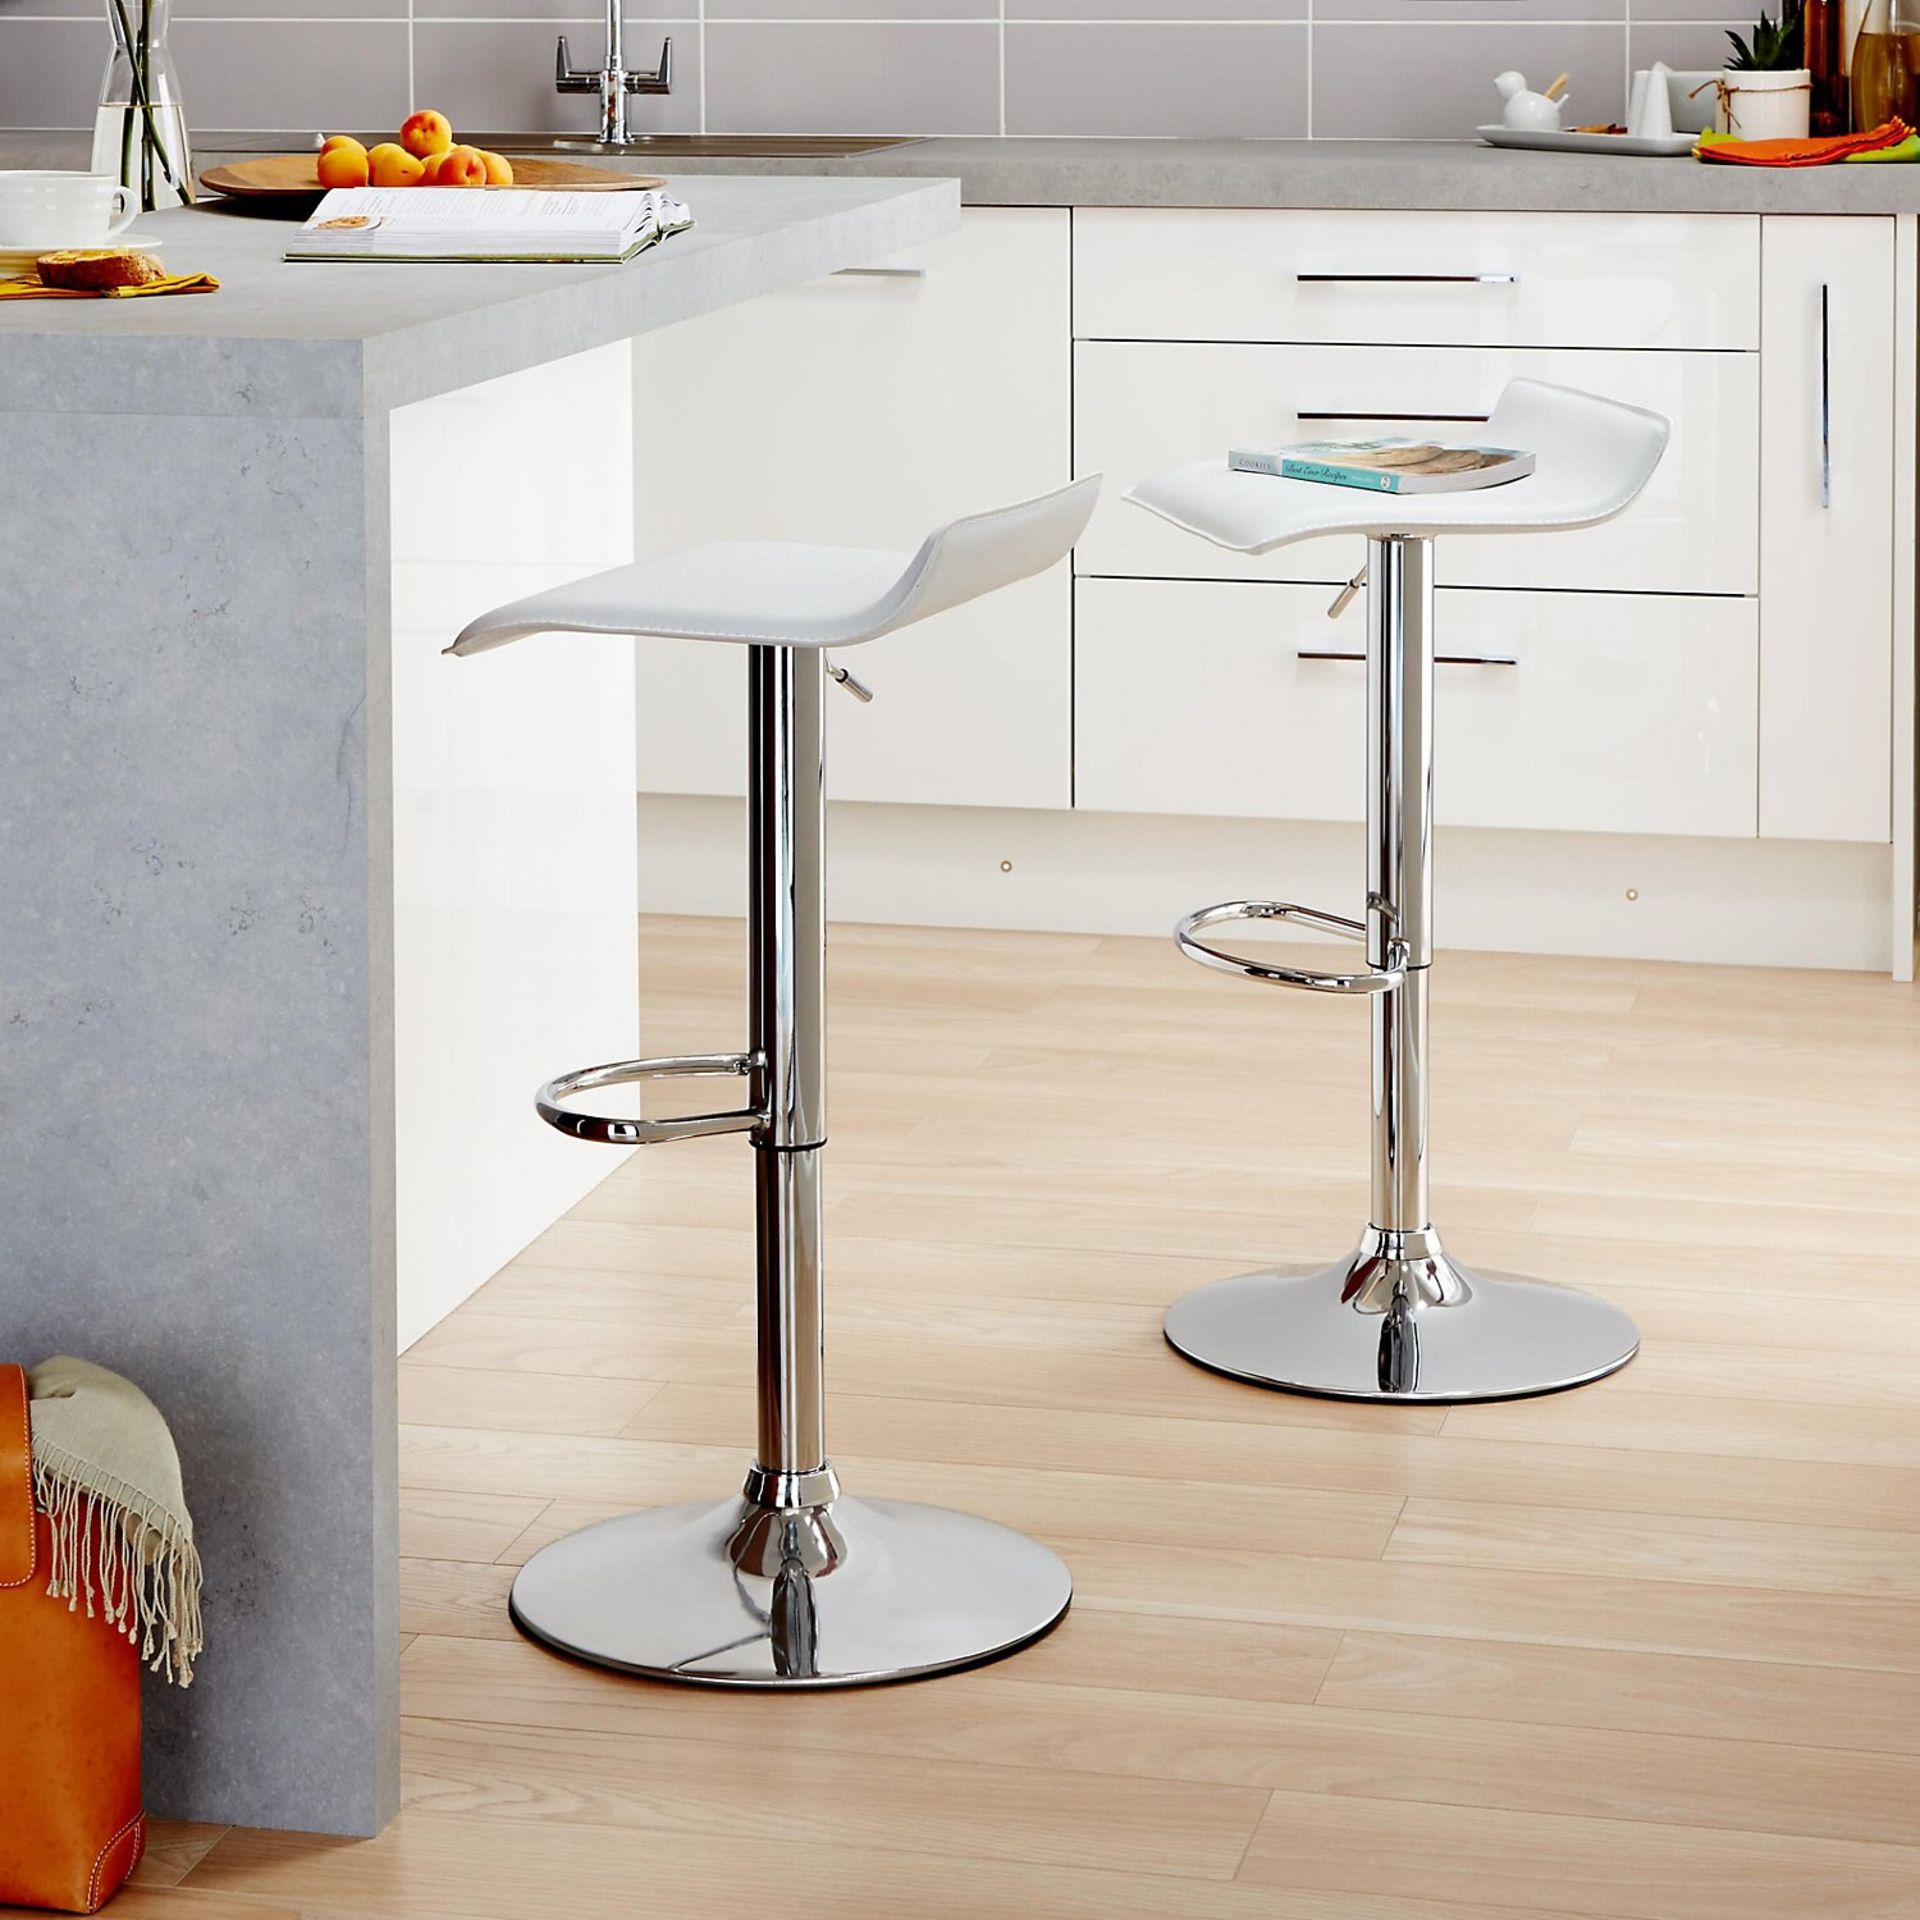 NEW Dante White & Chrome effect Bar stool (H)850mm (W)415mm. Bar Stools are a great way to inco...